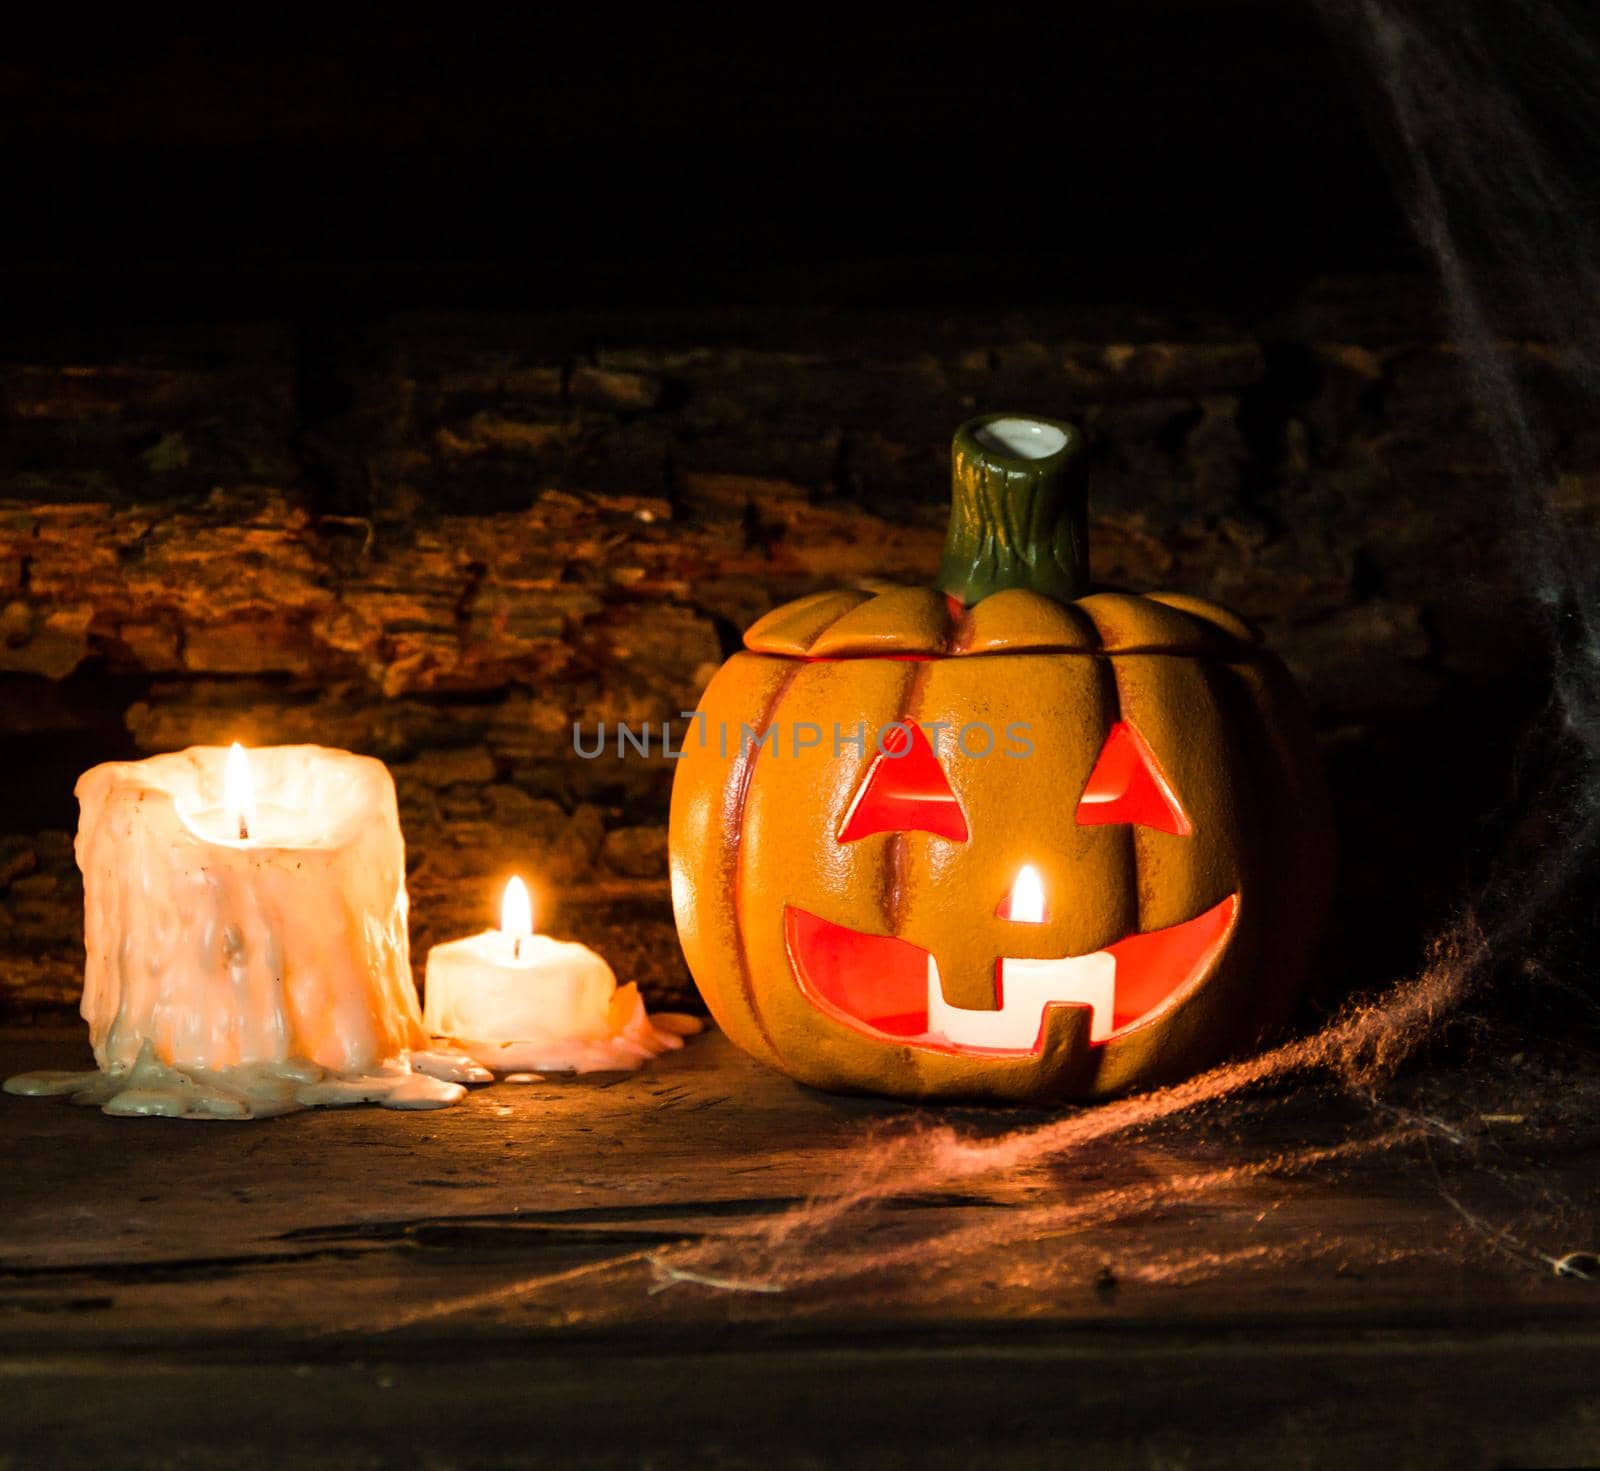 decoration for the celebration of hallowen with pumpkins, spiders, candles by GabrielaBertolini